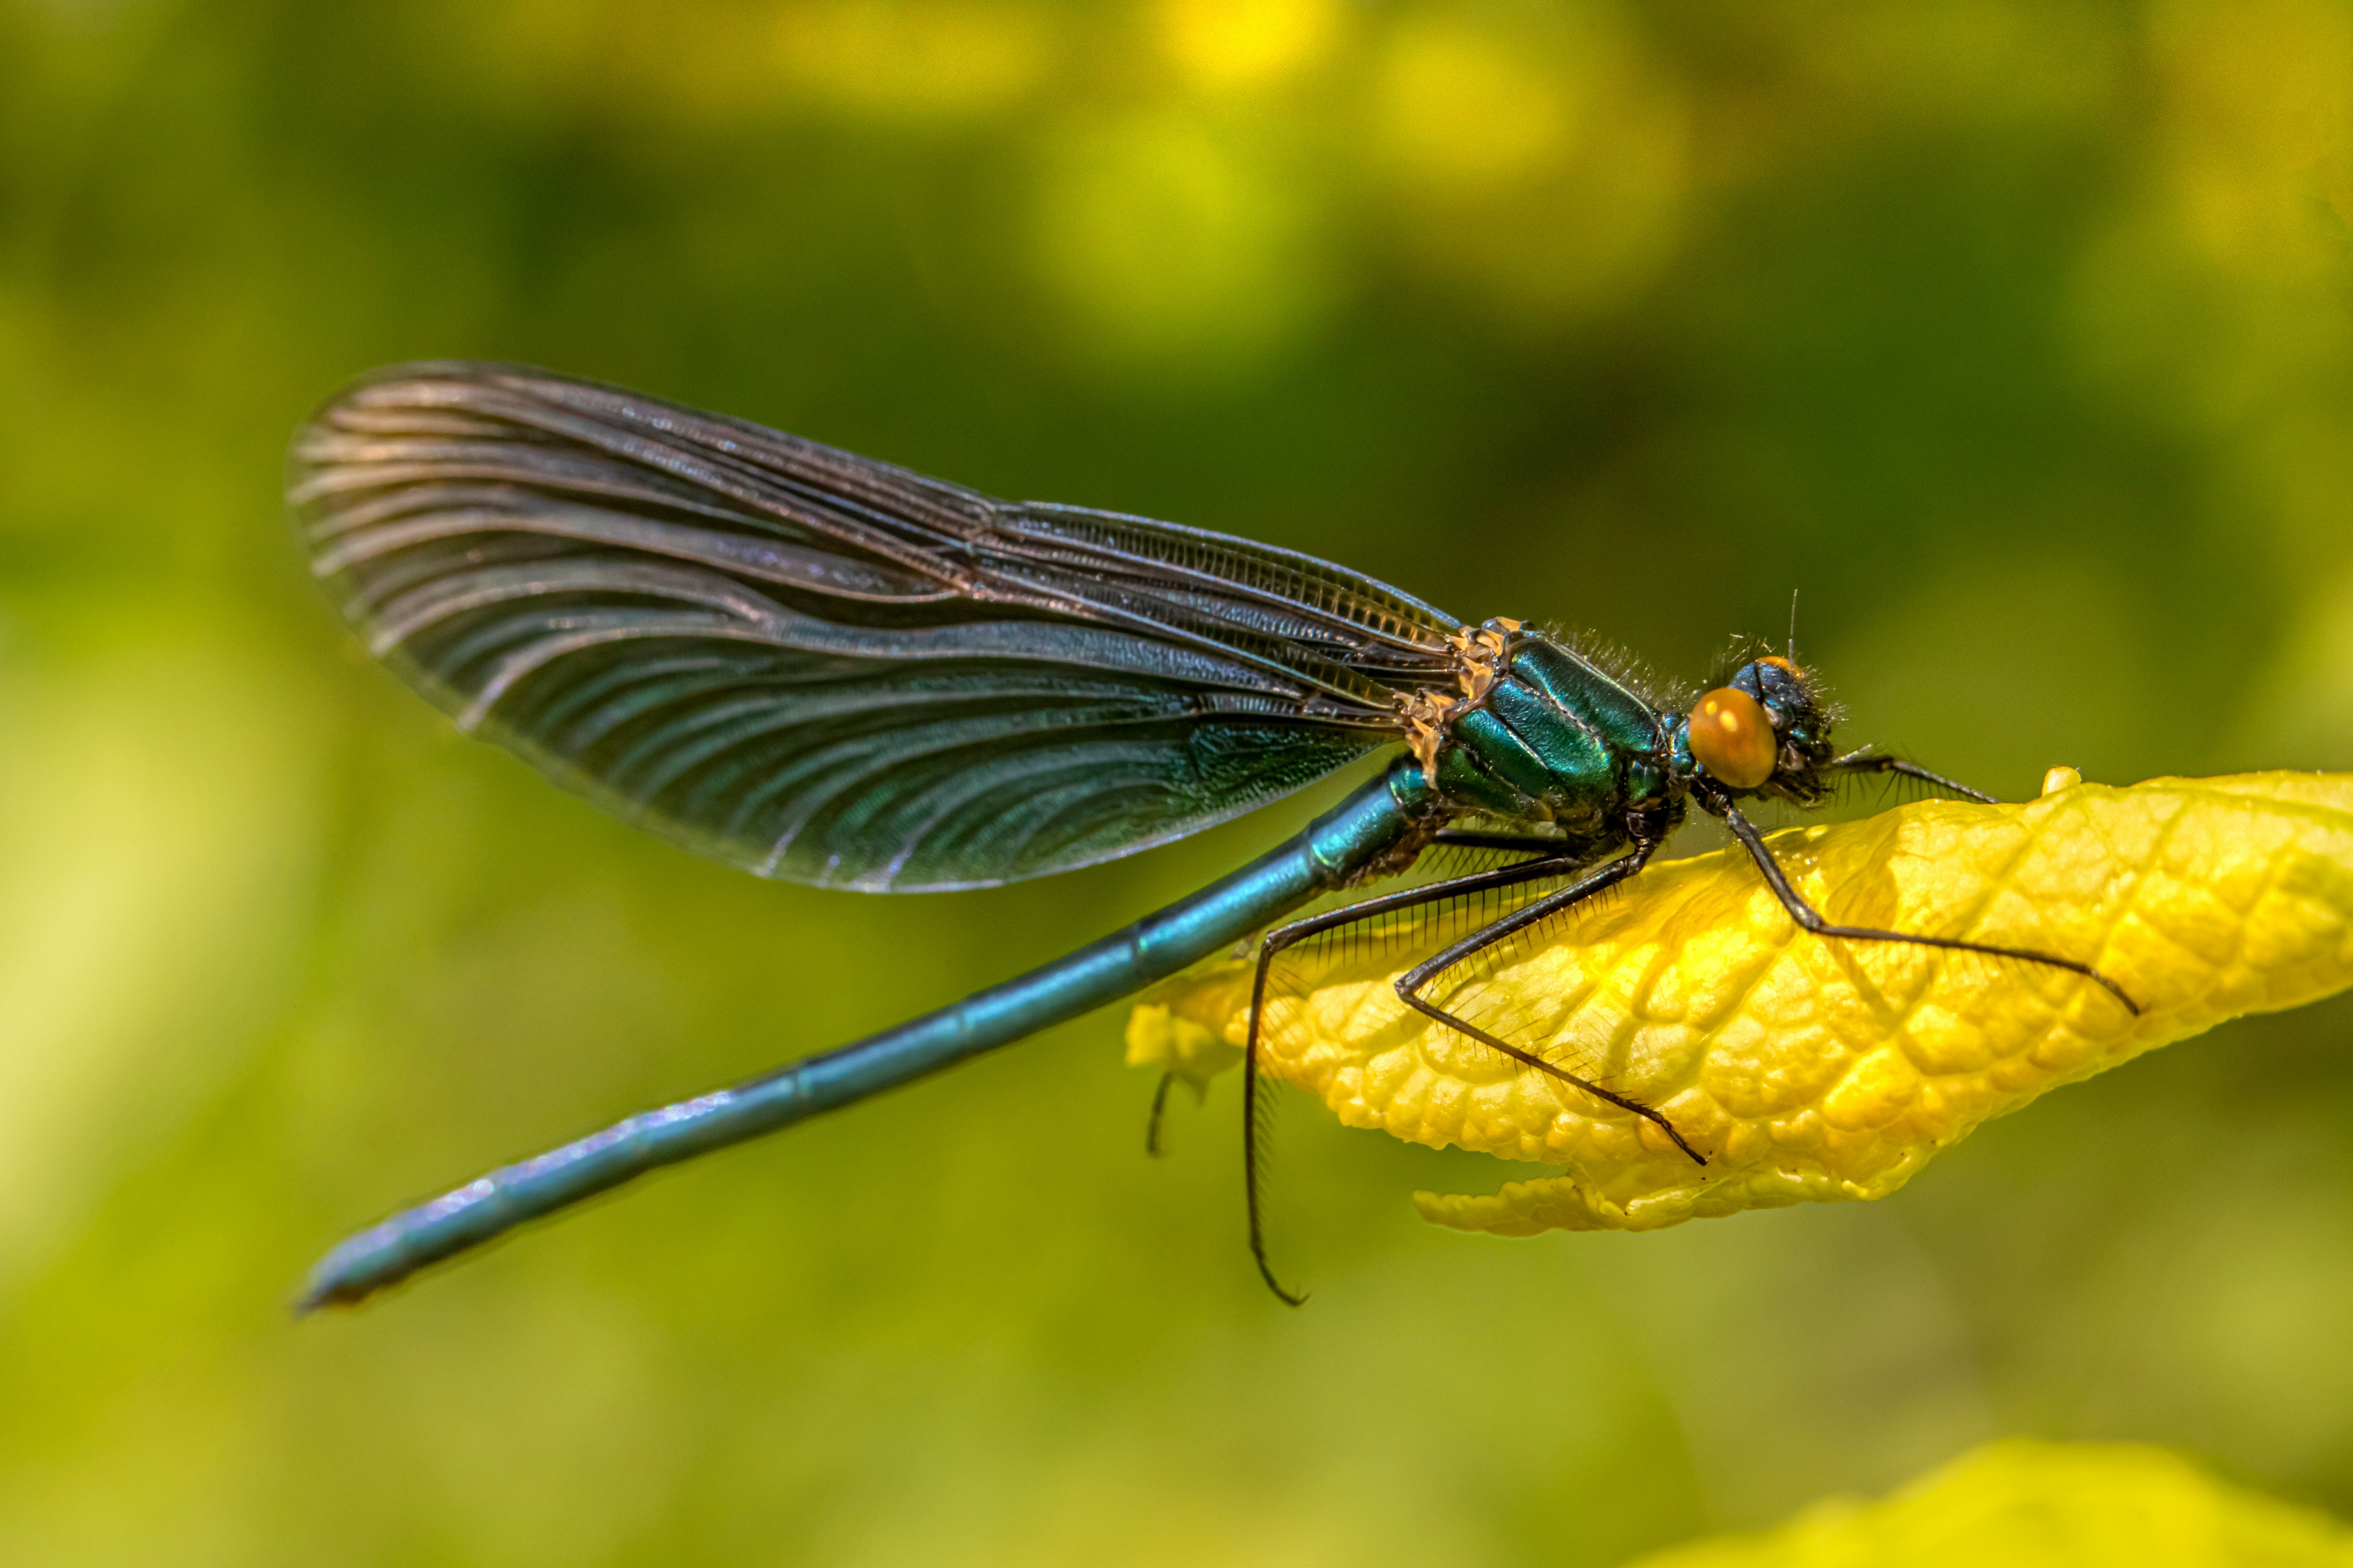 blue damselfly perched on yellow flower in close up photography during daytime